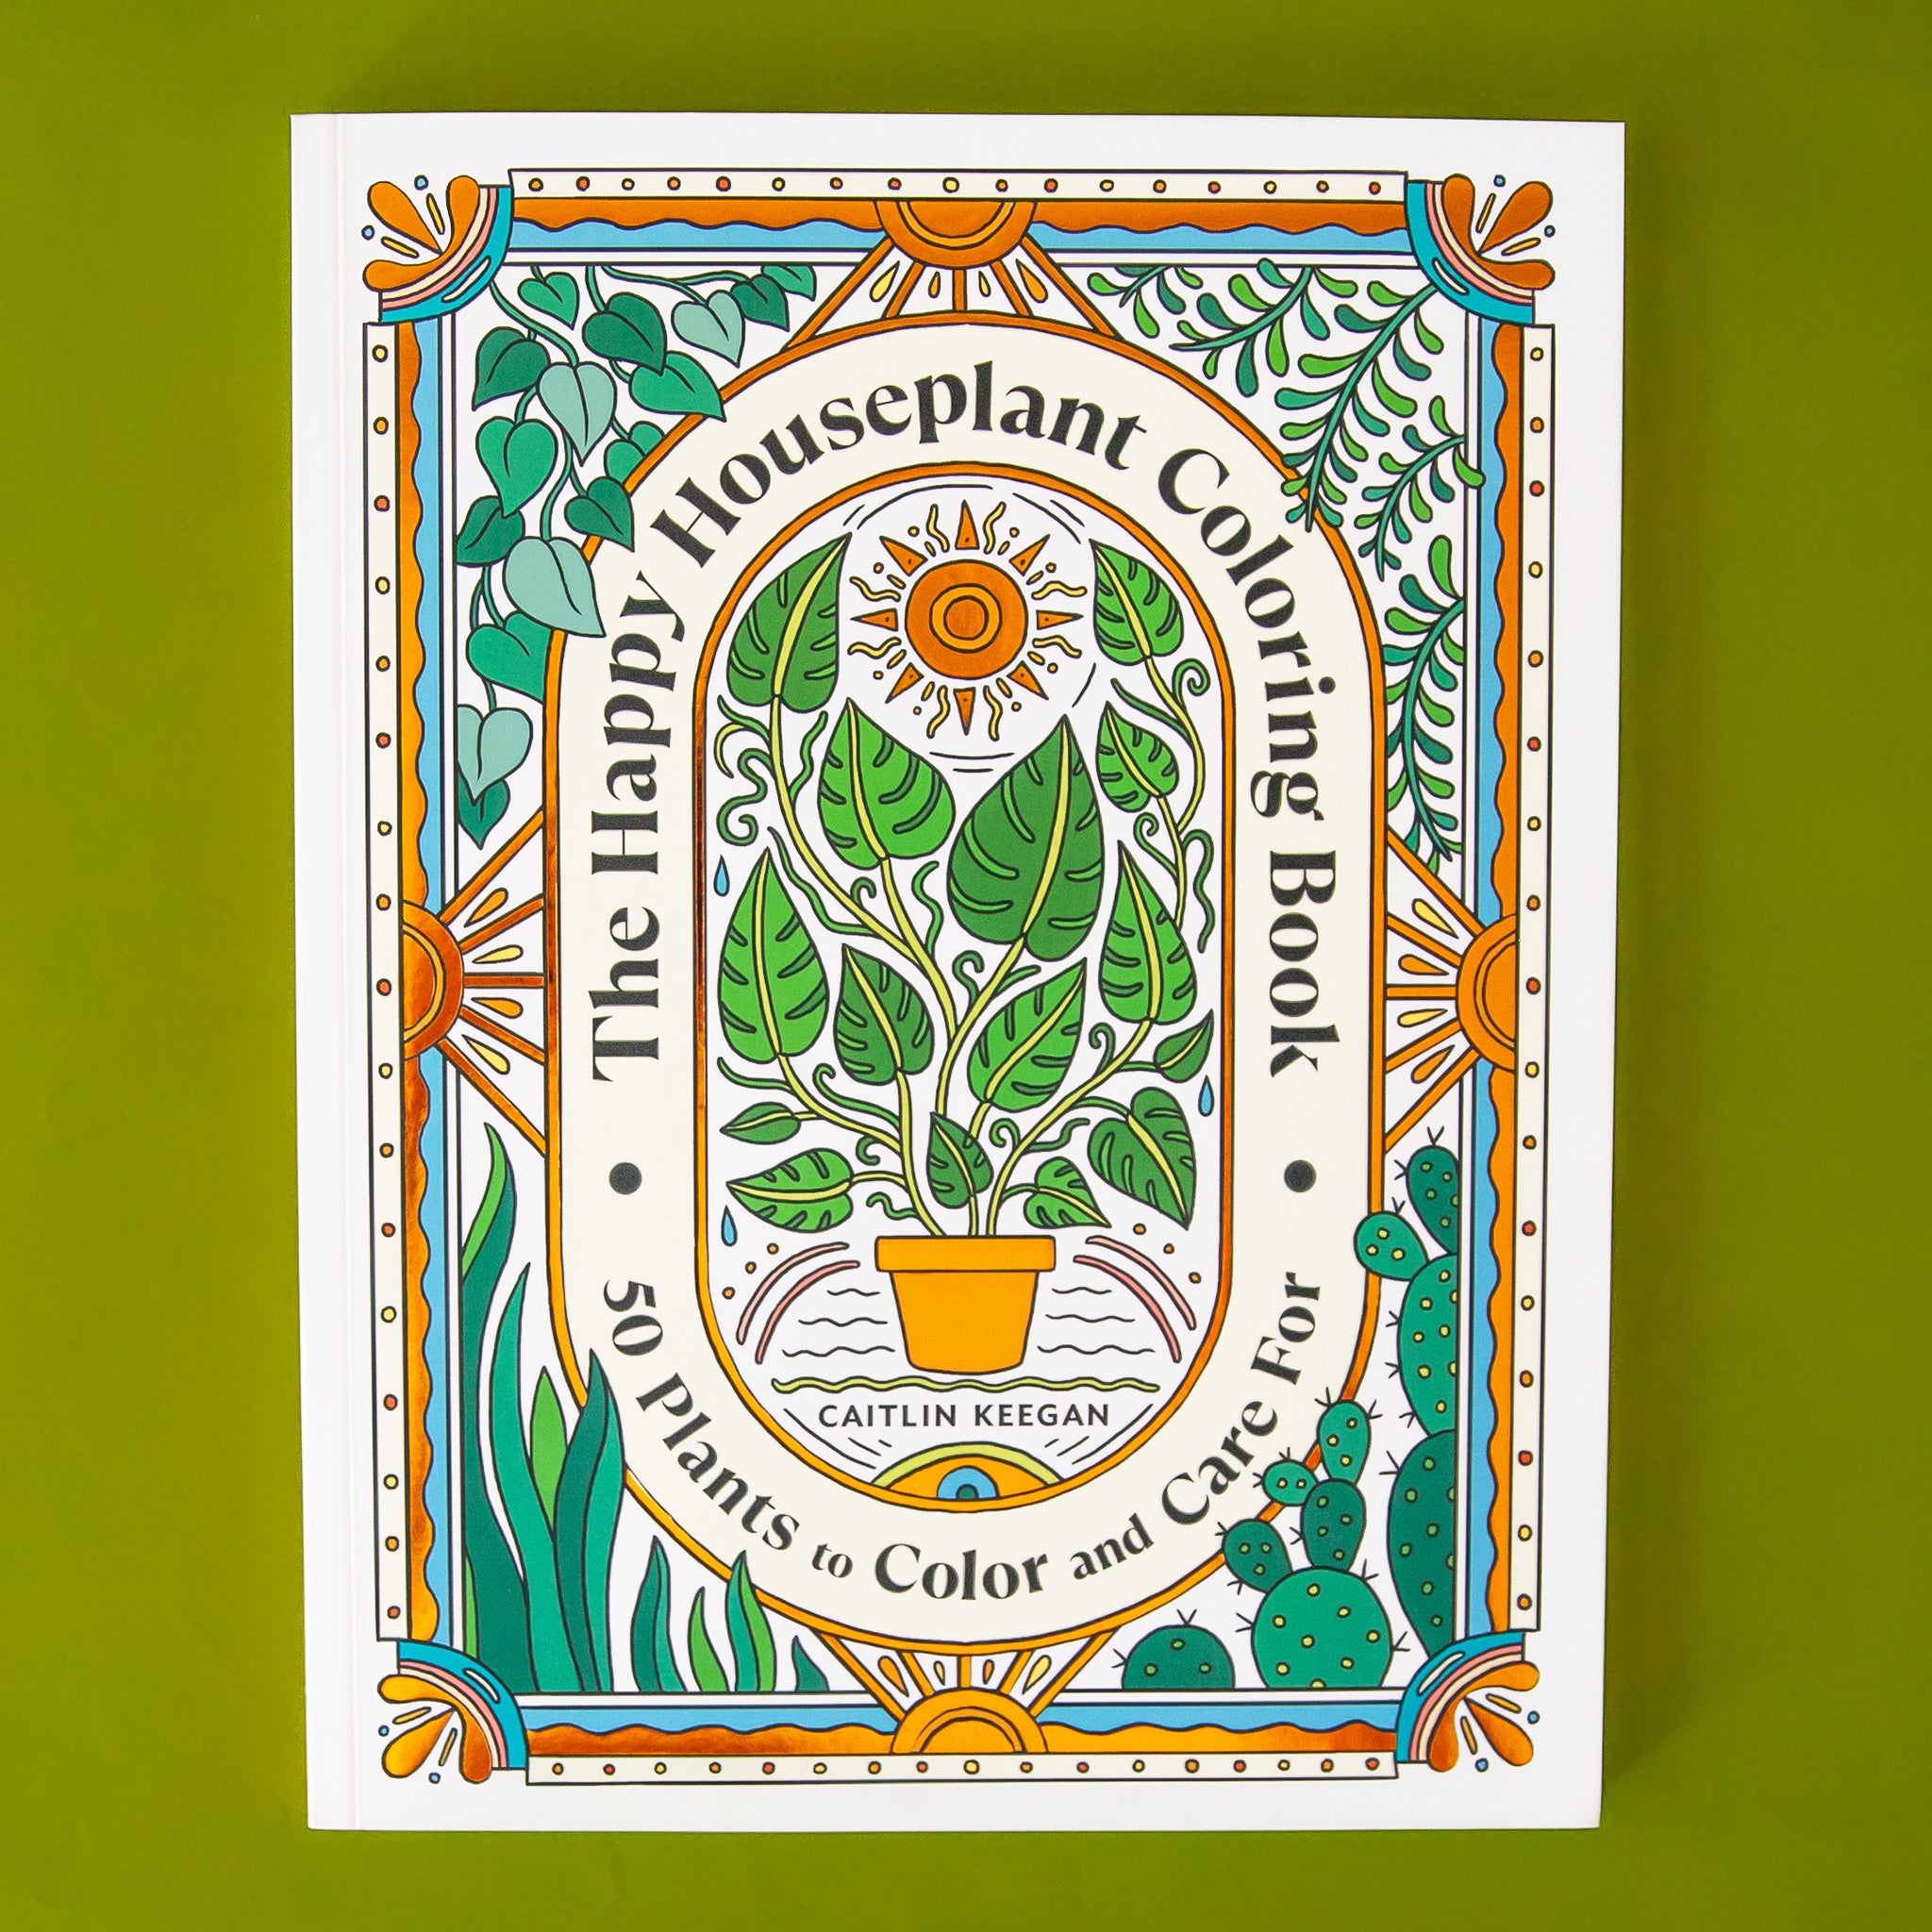 On a green background is a green and orange coloring book with illustrations of house plants and text arched around that reads, "The Happy Houseplant Coloring Book", "50 Plants to Color and Care For". 